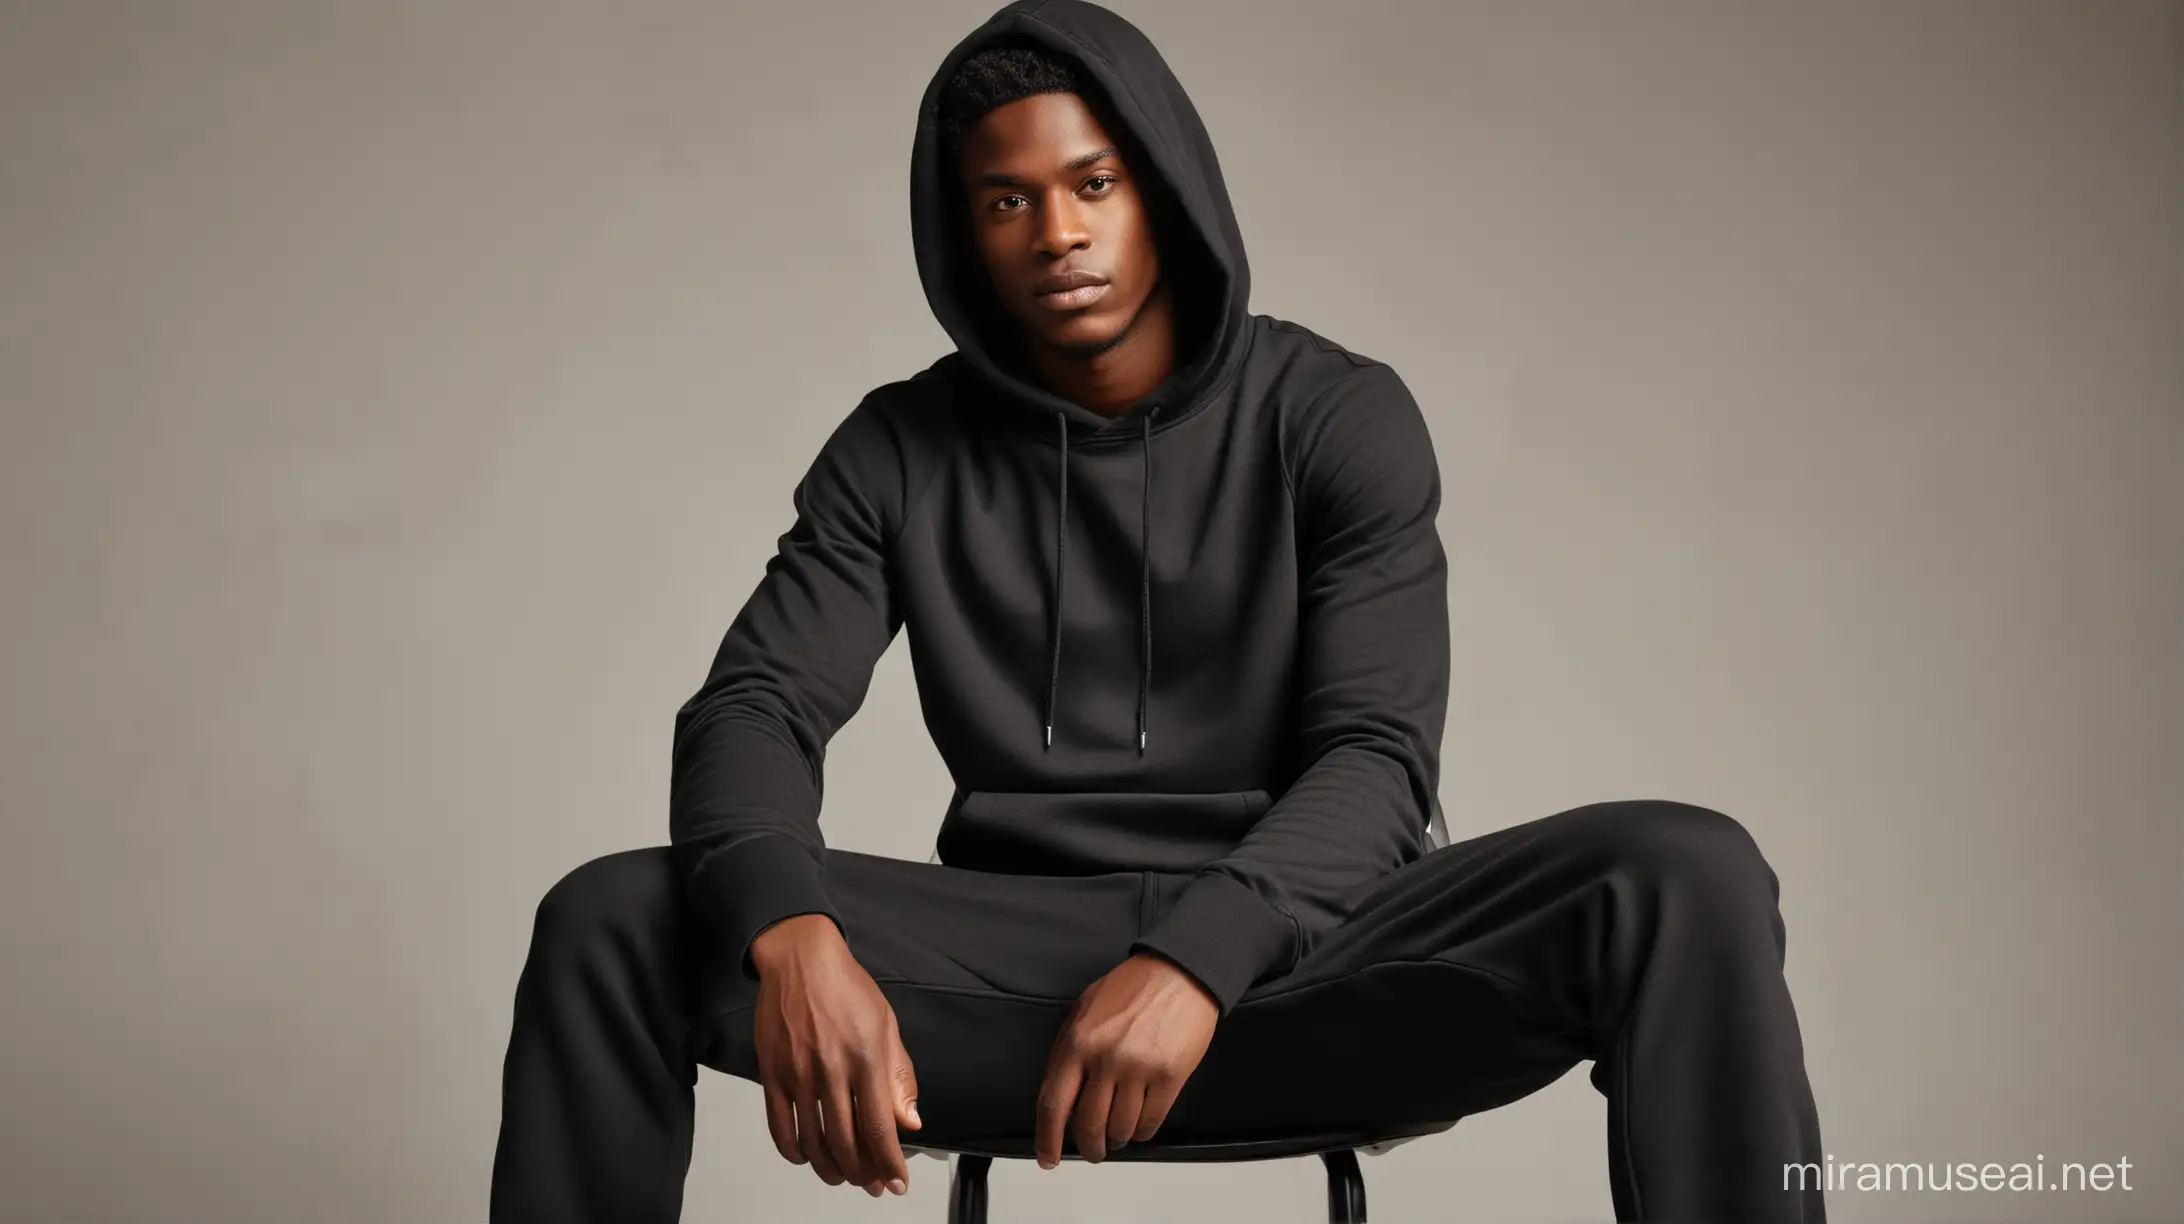 black man model full body sitting down in a chair with a plain black hoodie on and plain black jogging pants on